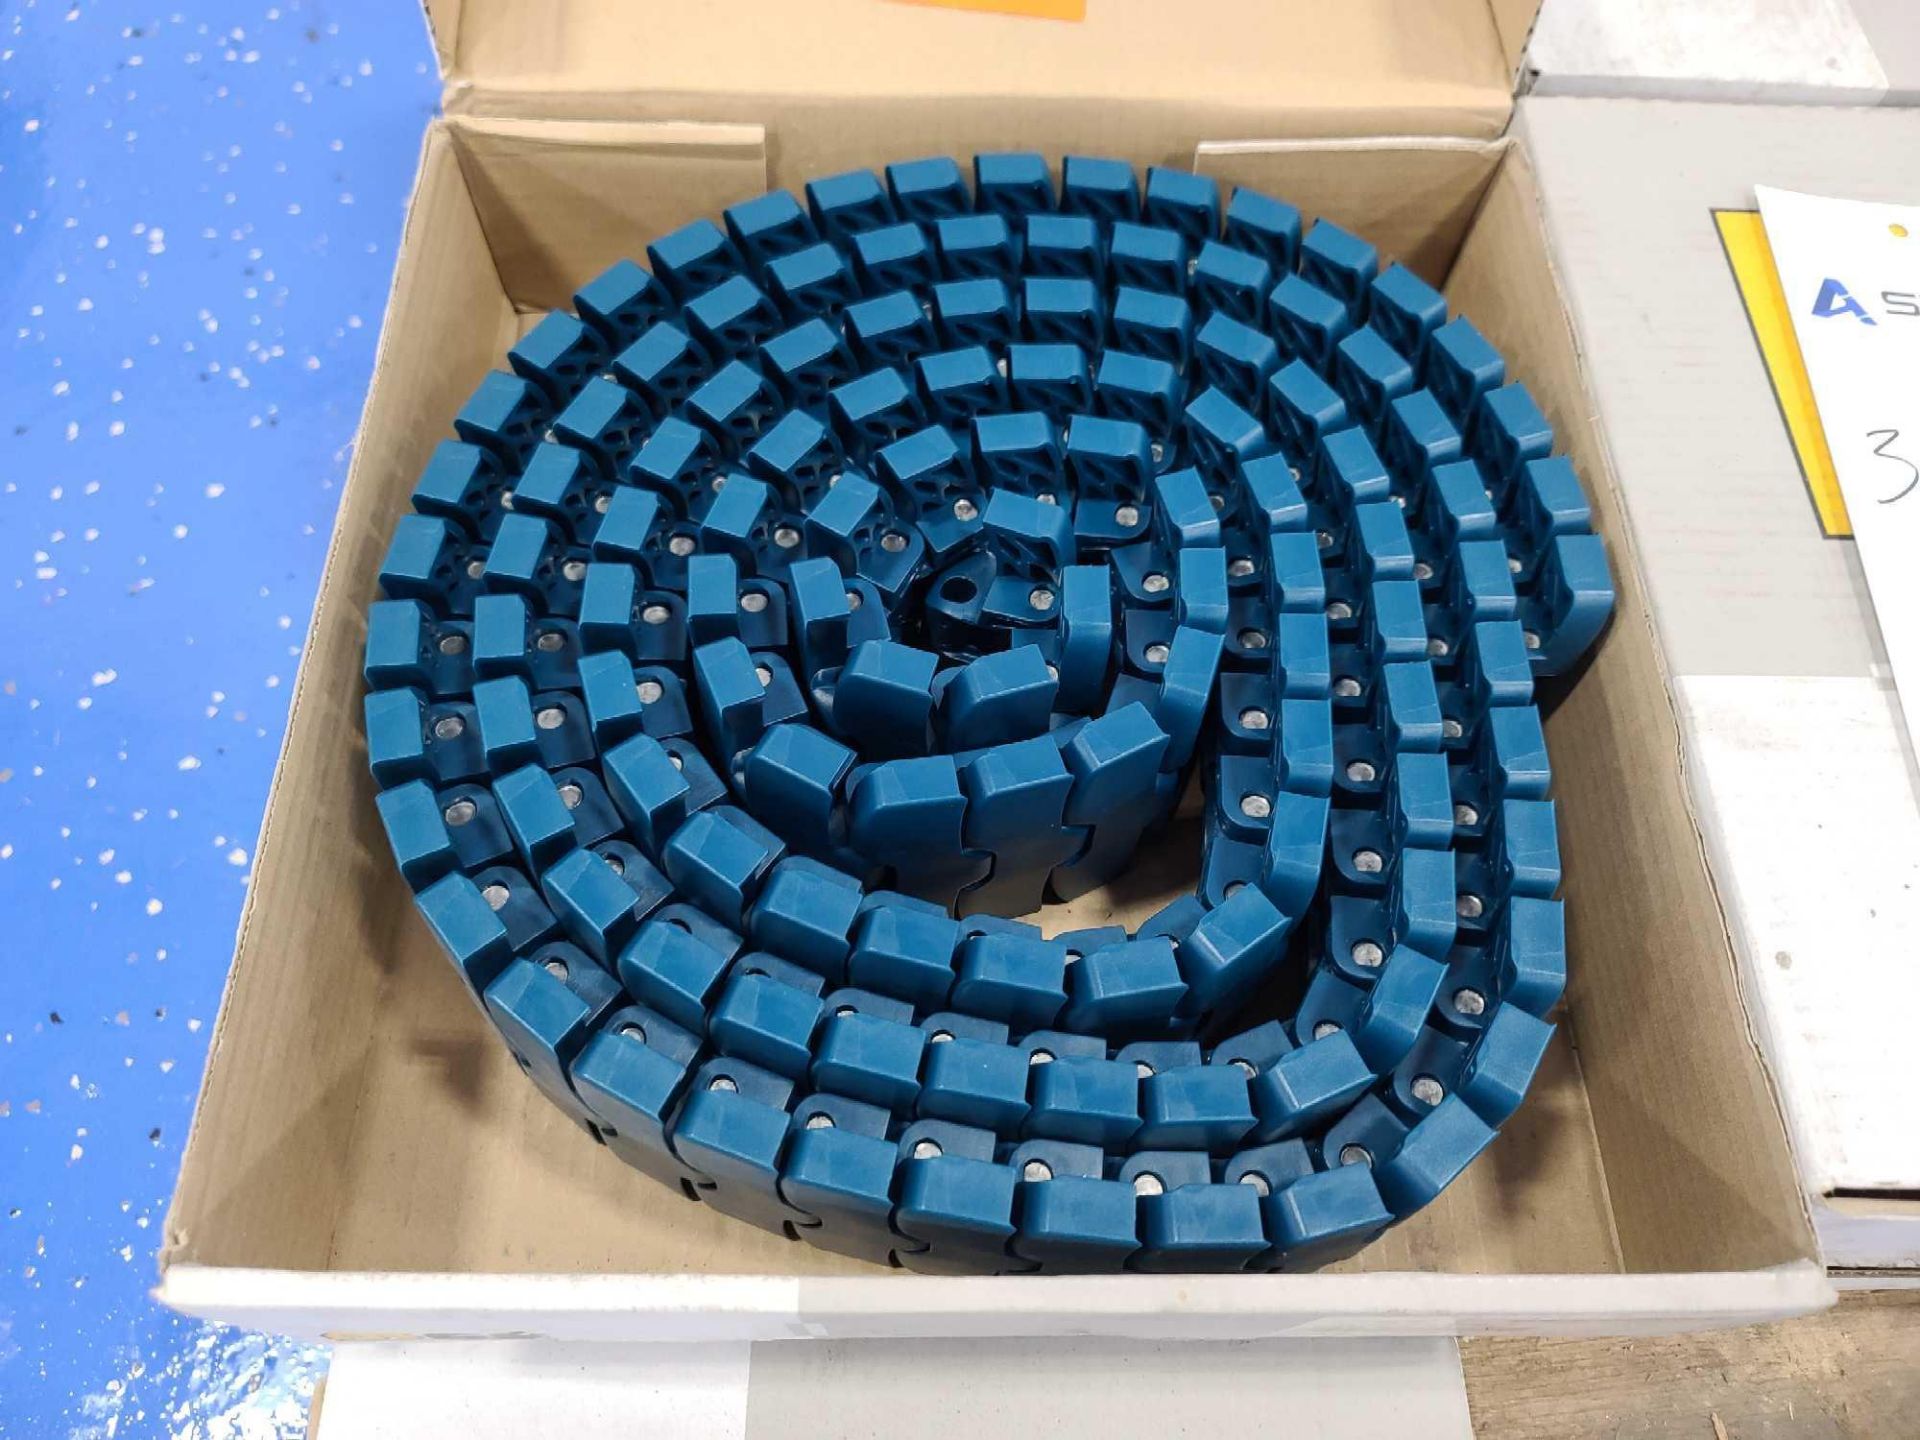 (15) Sections of Rexnord MCC Plastic Mat-Top Conveyor Belts - New in Box - Image 3 of 5